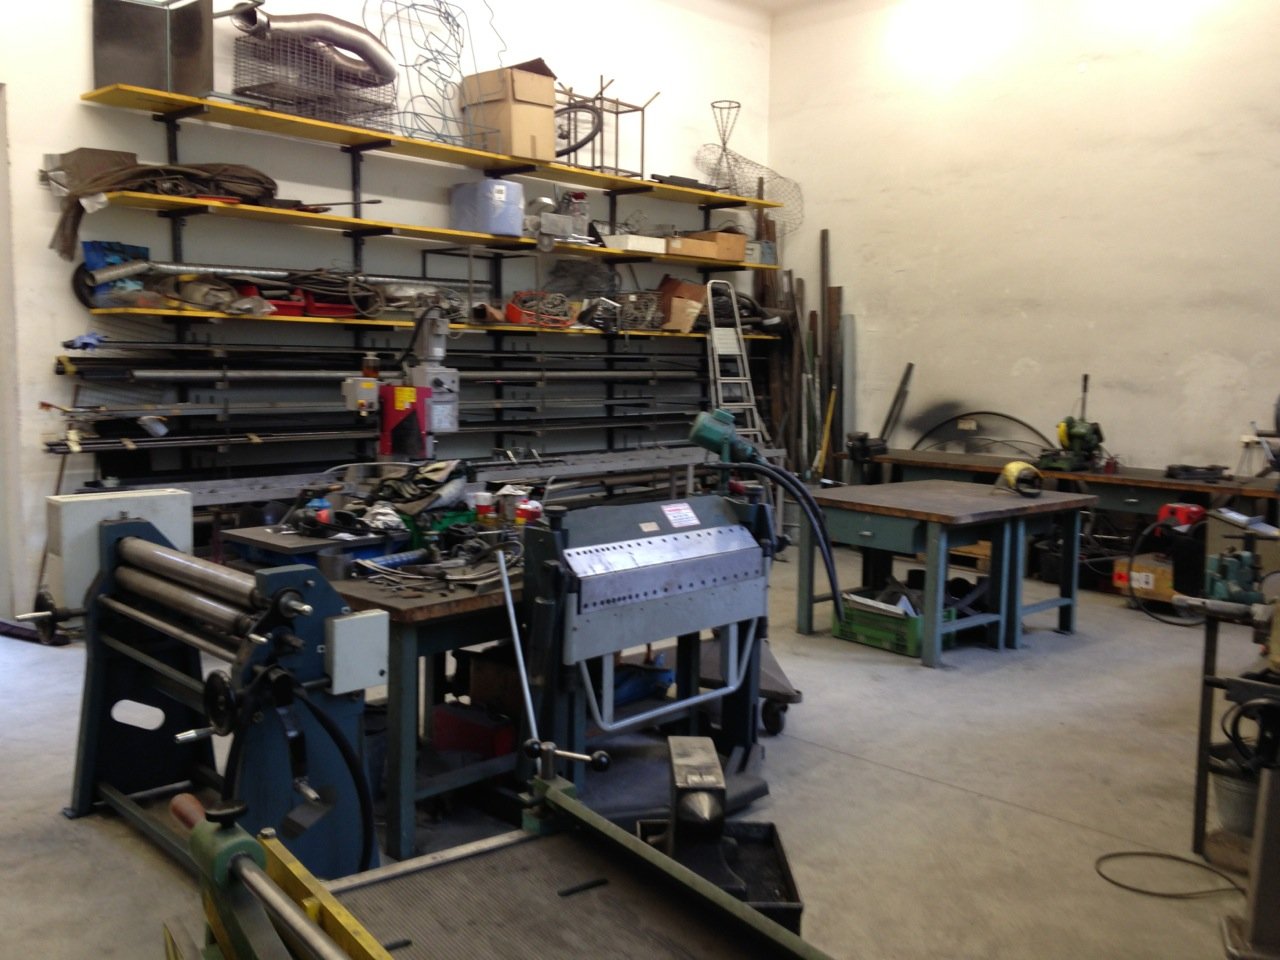 View into the metalworking workshop